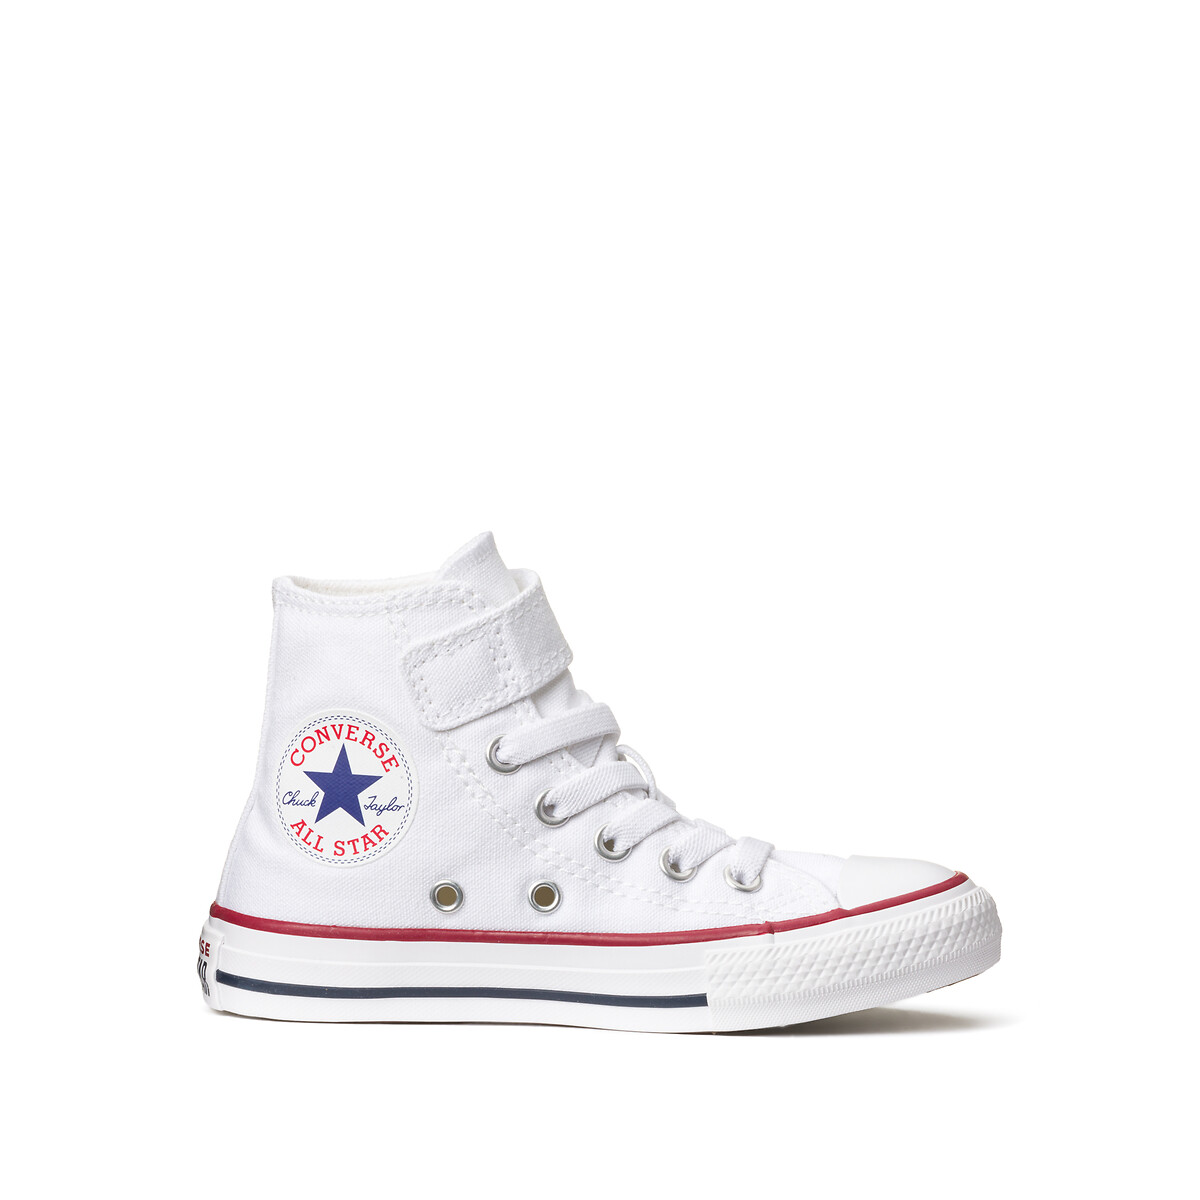 Converse Sneakers CHUCK TAYLOR ALL STAR 1V EASY ON Hi online kopen